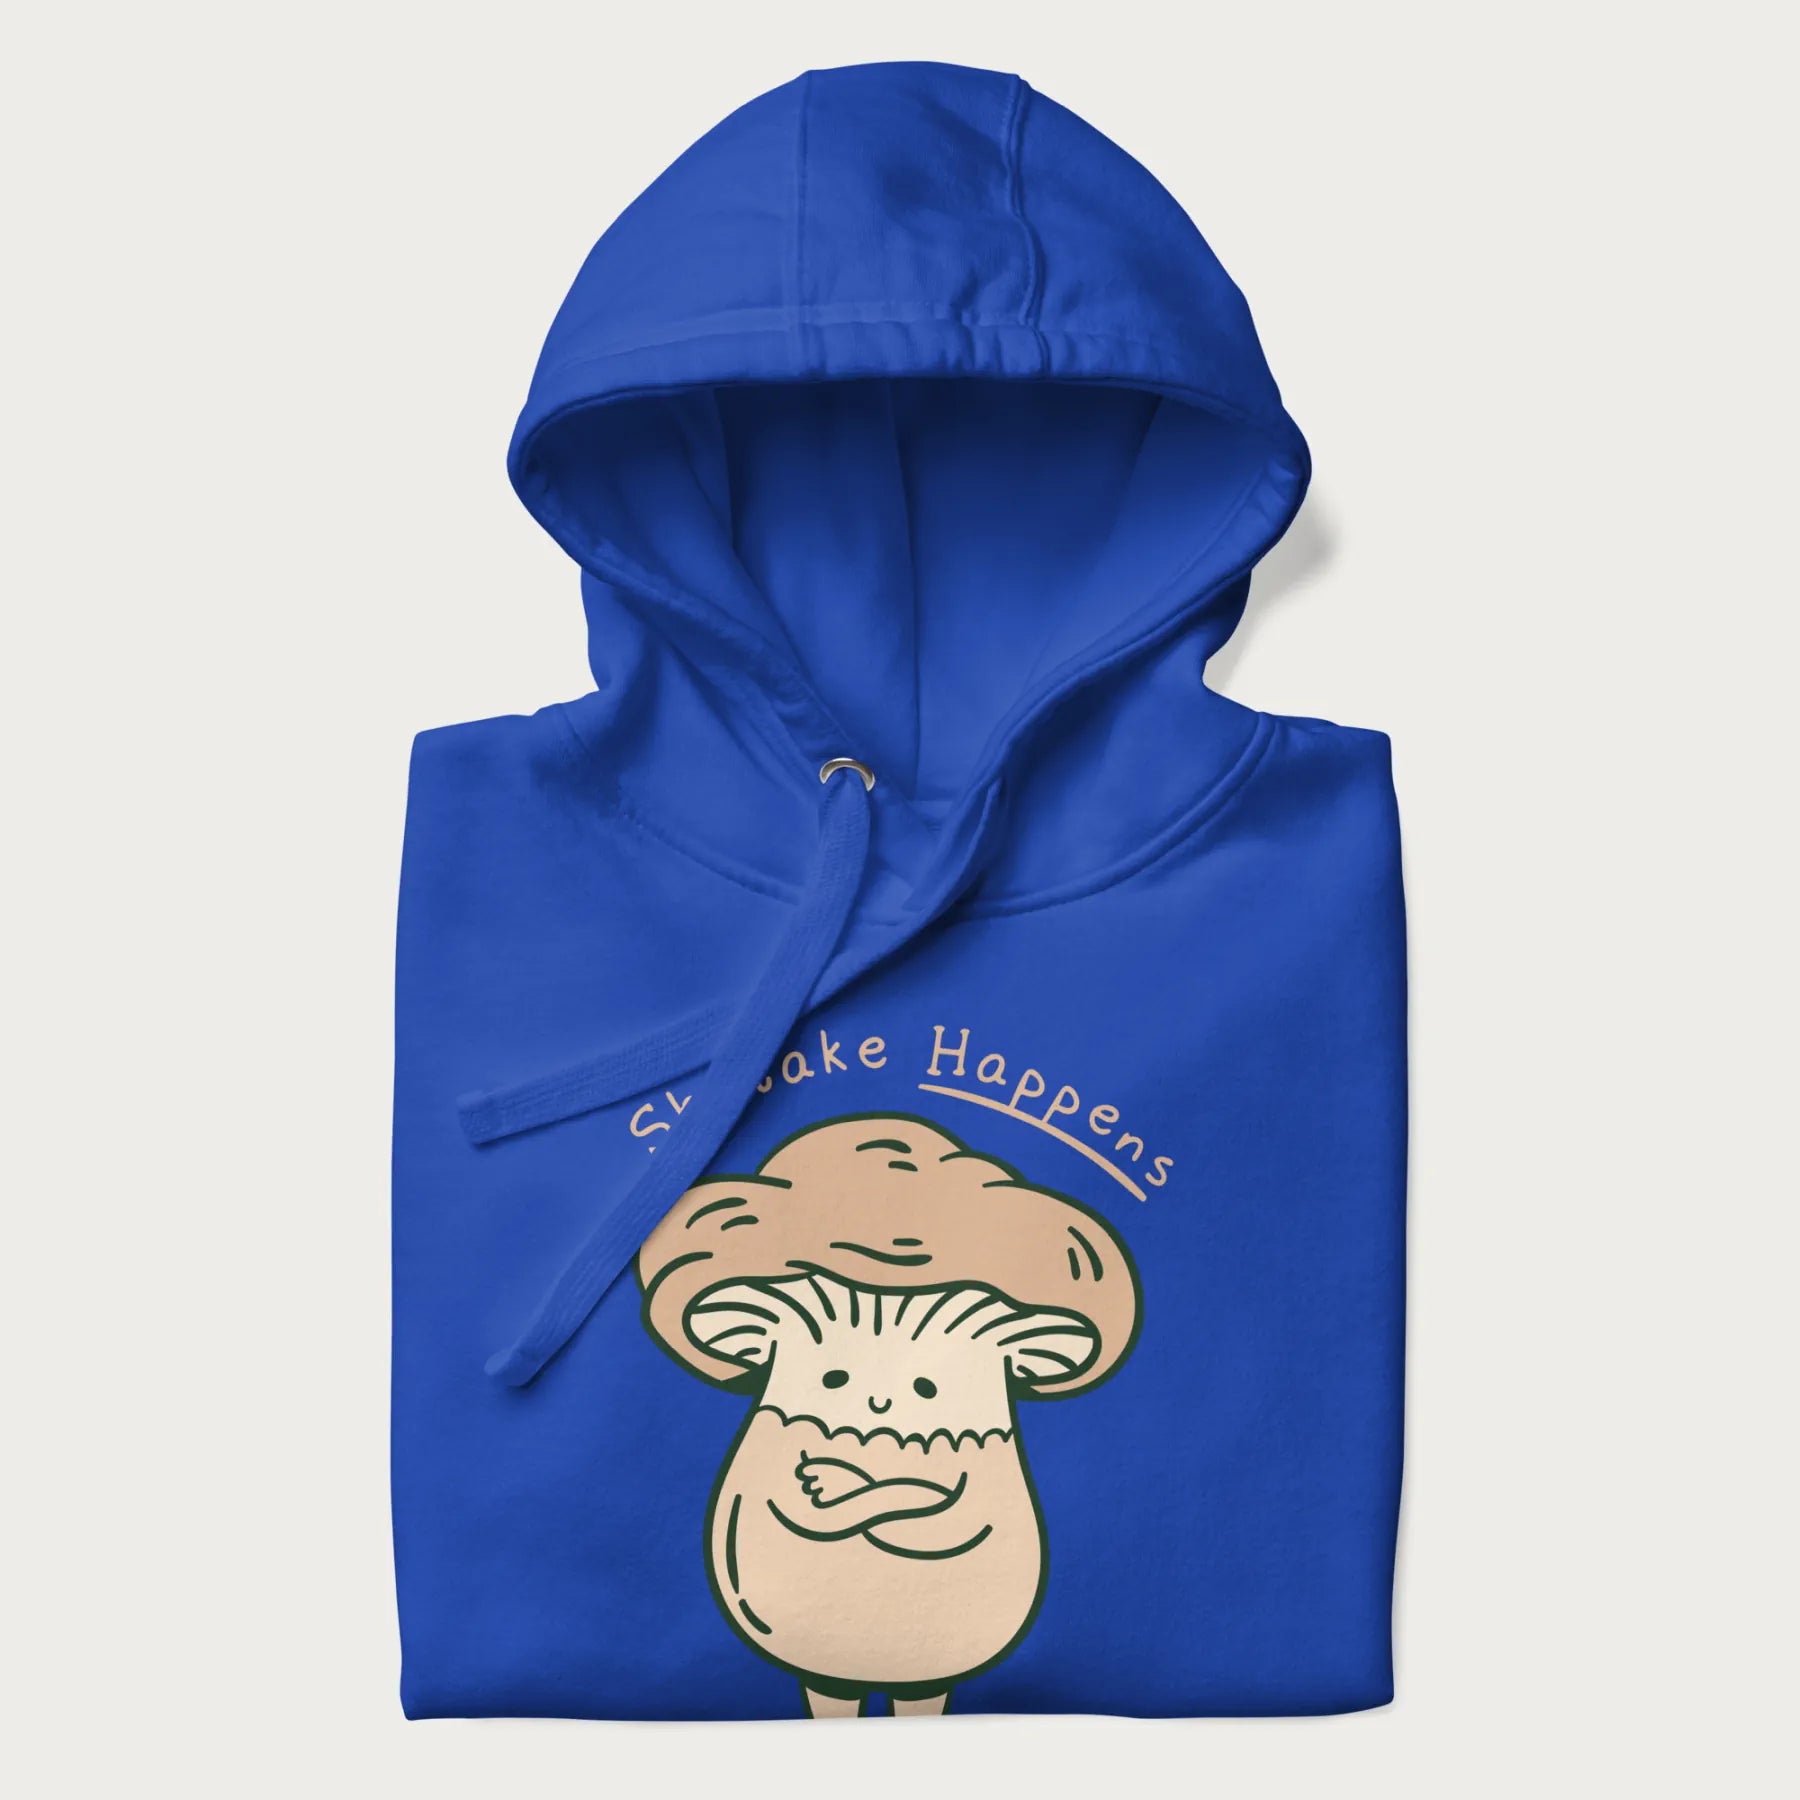 Folded royal blue hoodie with a graphic of an adorable mushroom character and the text 'Shiitake Happens'.